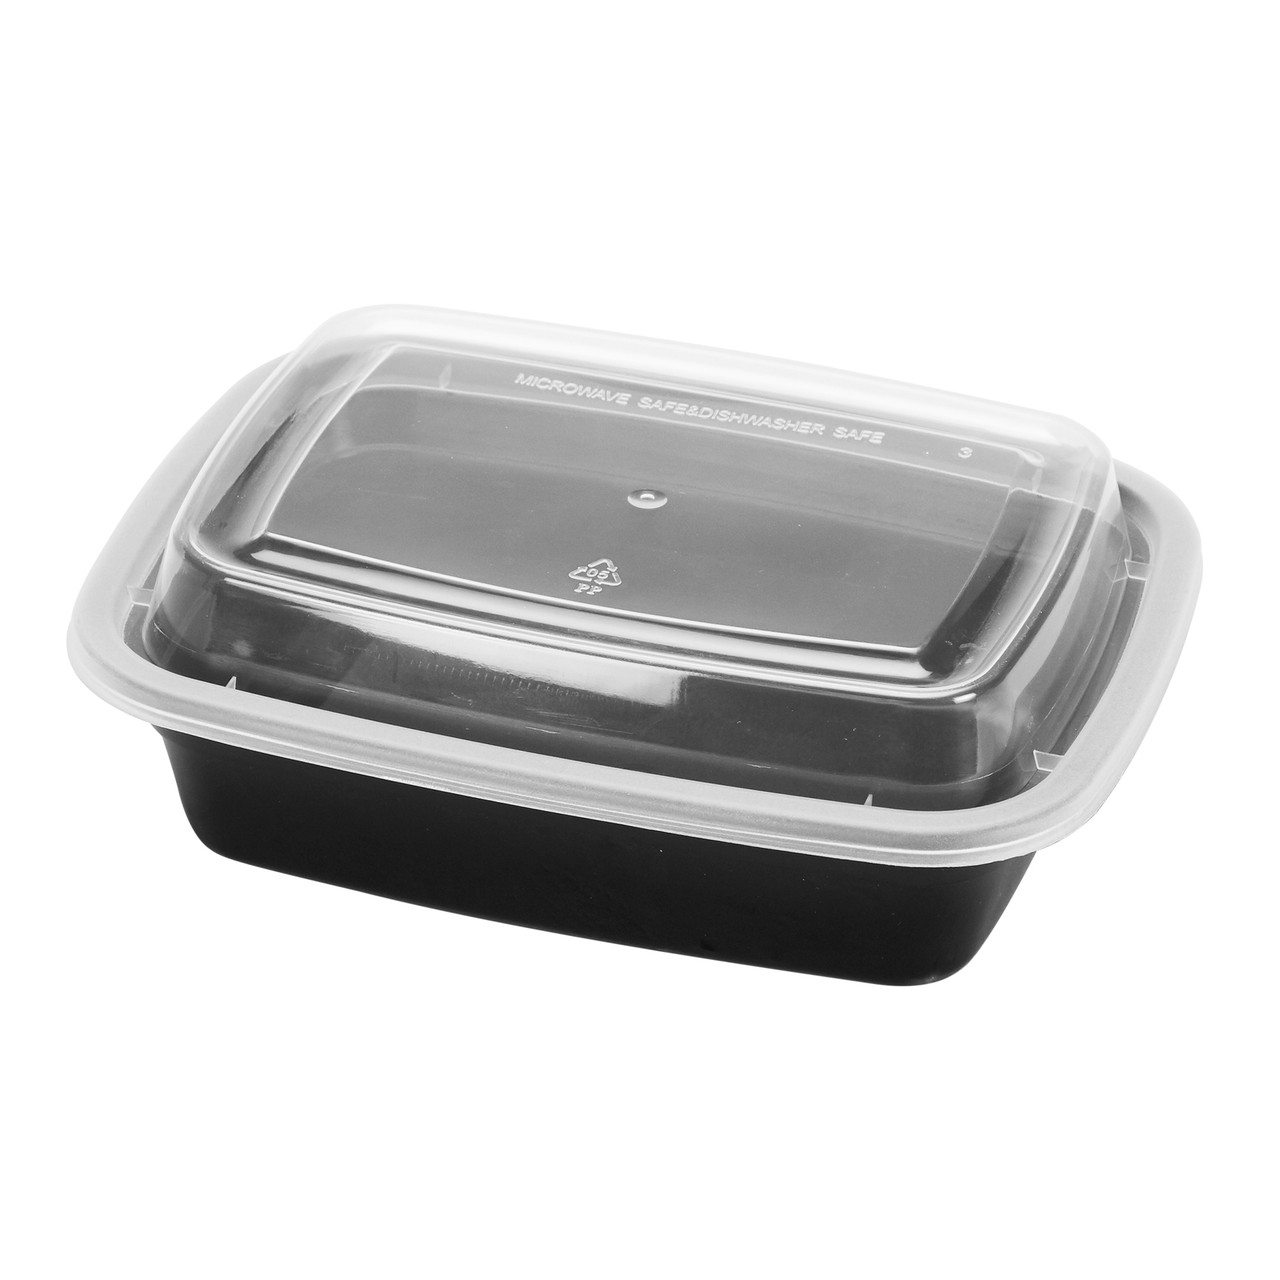 Blaze Hot Food Packaging 12 oz Microwave Safe Container & Lid Combo Pack (IMRCT12CMB150)